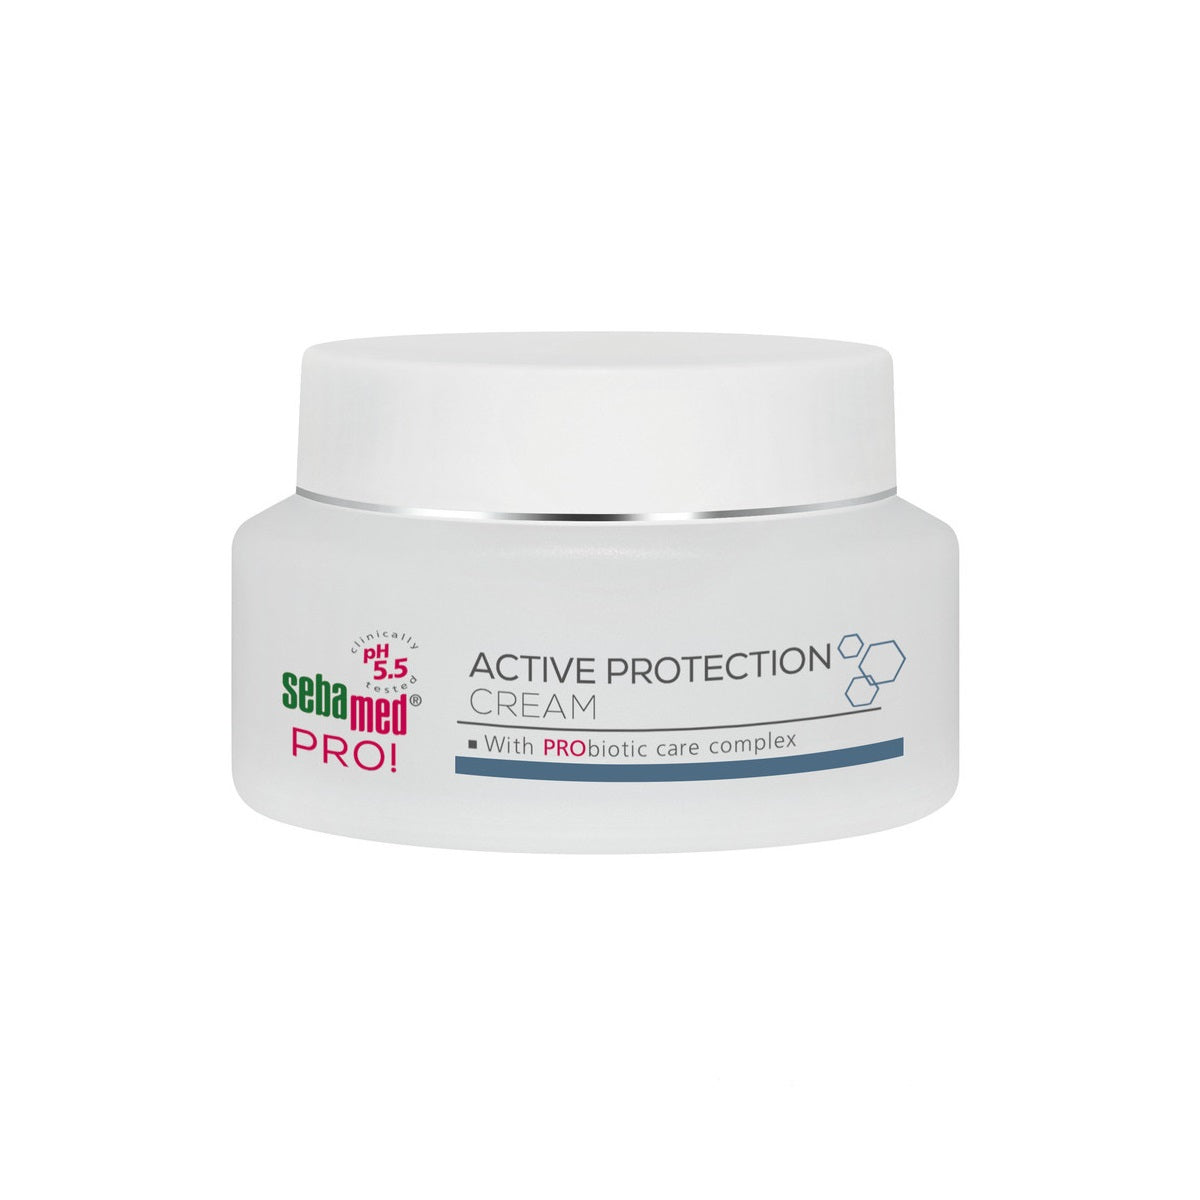 Product jar for Sebamed PRO! Active Protection Cream (50 mL)